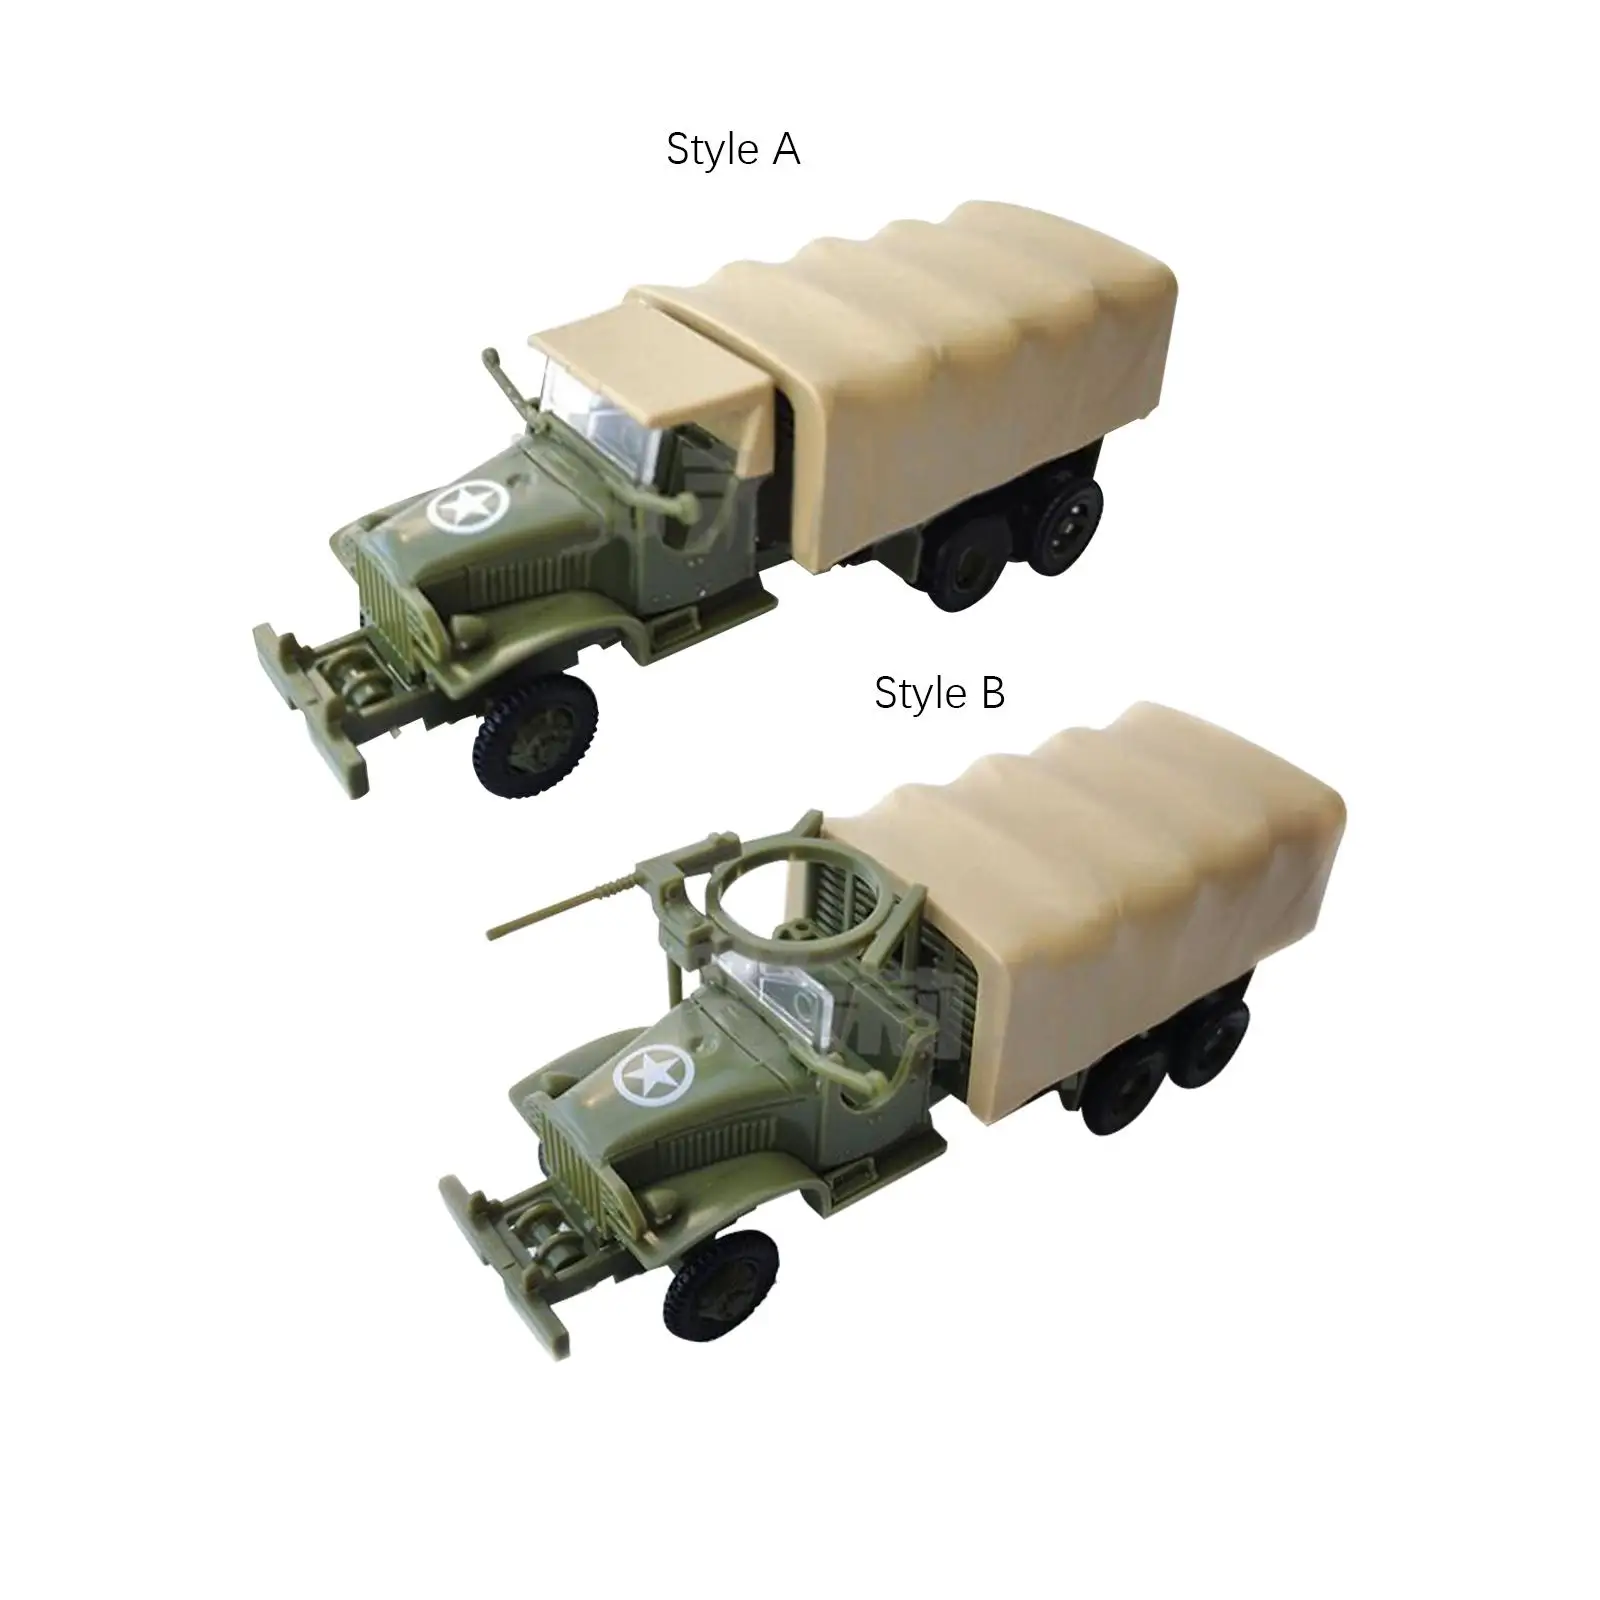 Simulation 1/72 Truck Model Kits Collections Puzzle Assembly Model Car Kits Building Model Kits for Gift Tabletop Decor Boys